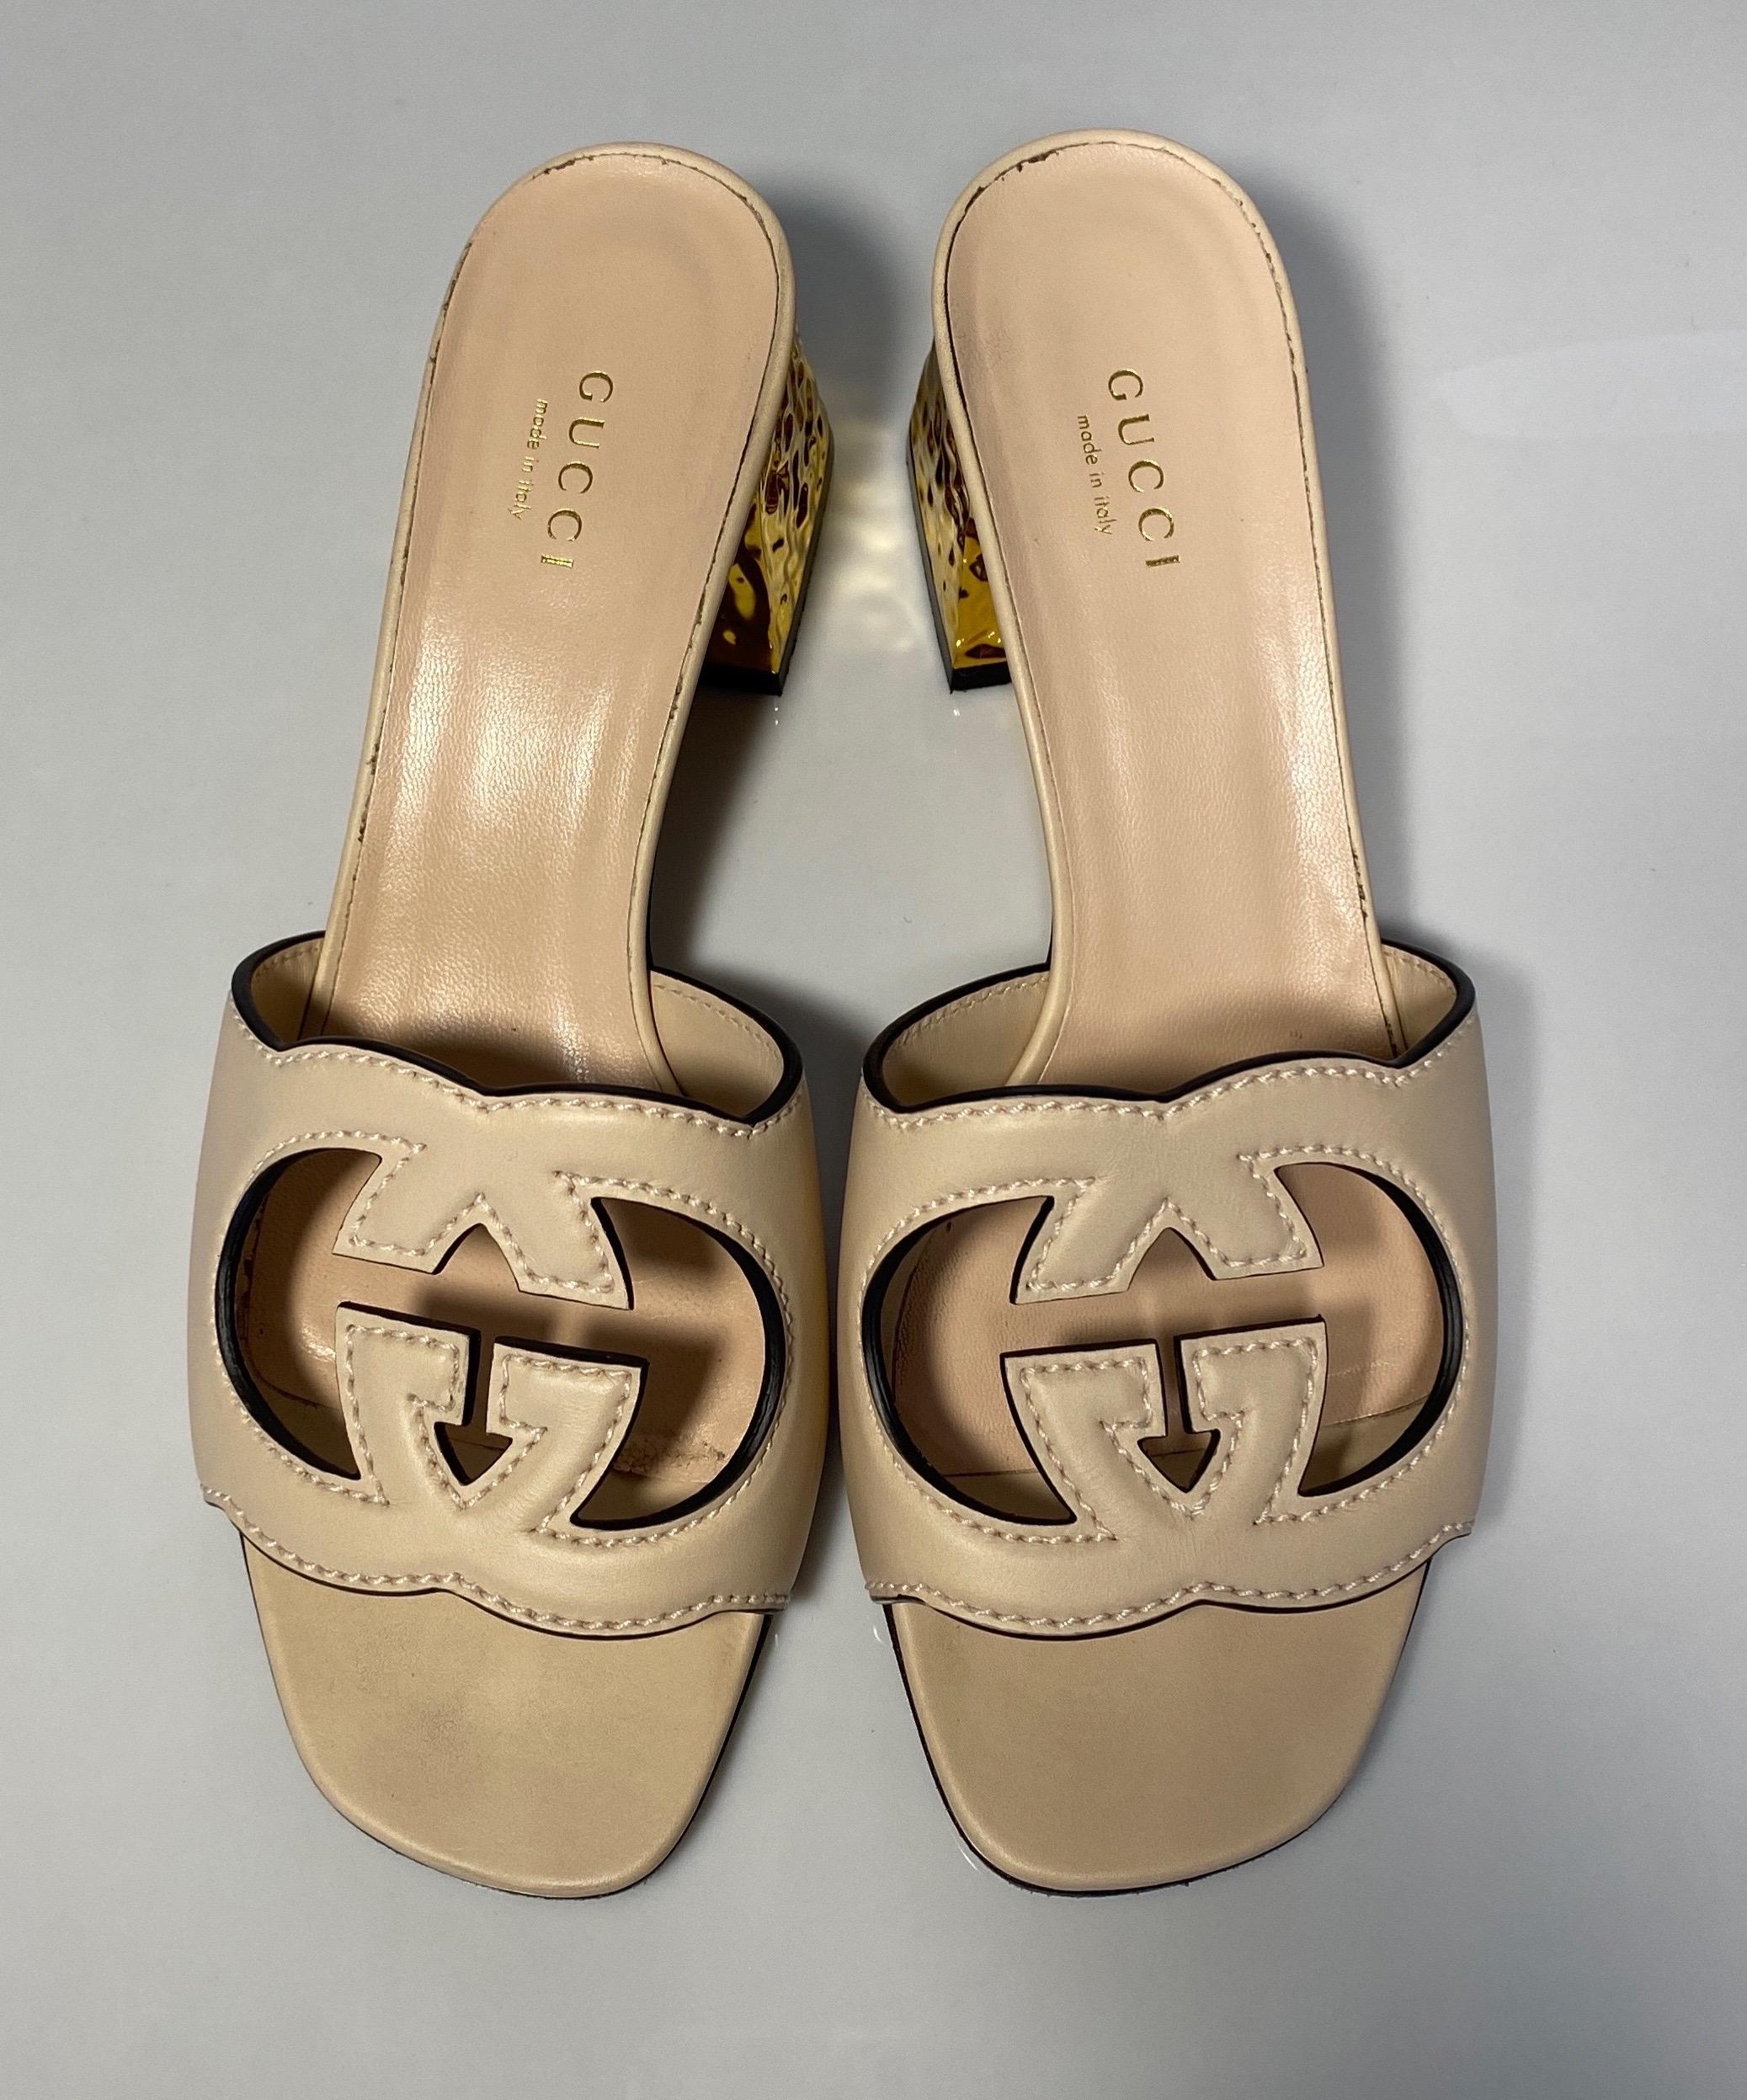 Gucci Rose Leather Interlocking G Cut-out Sandal - Size 37.5 2